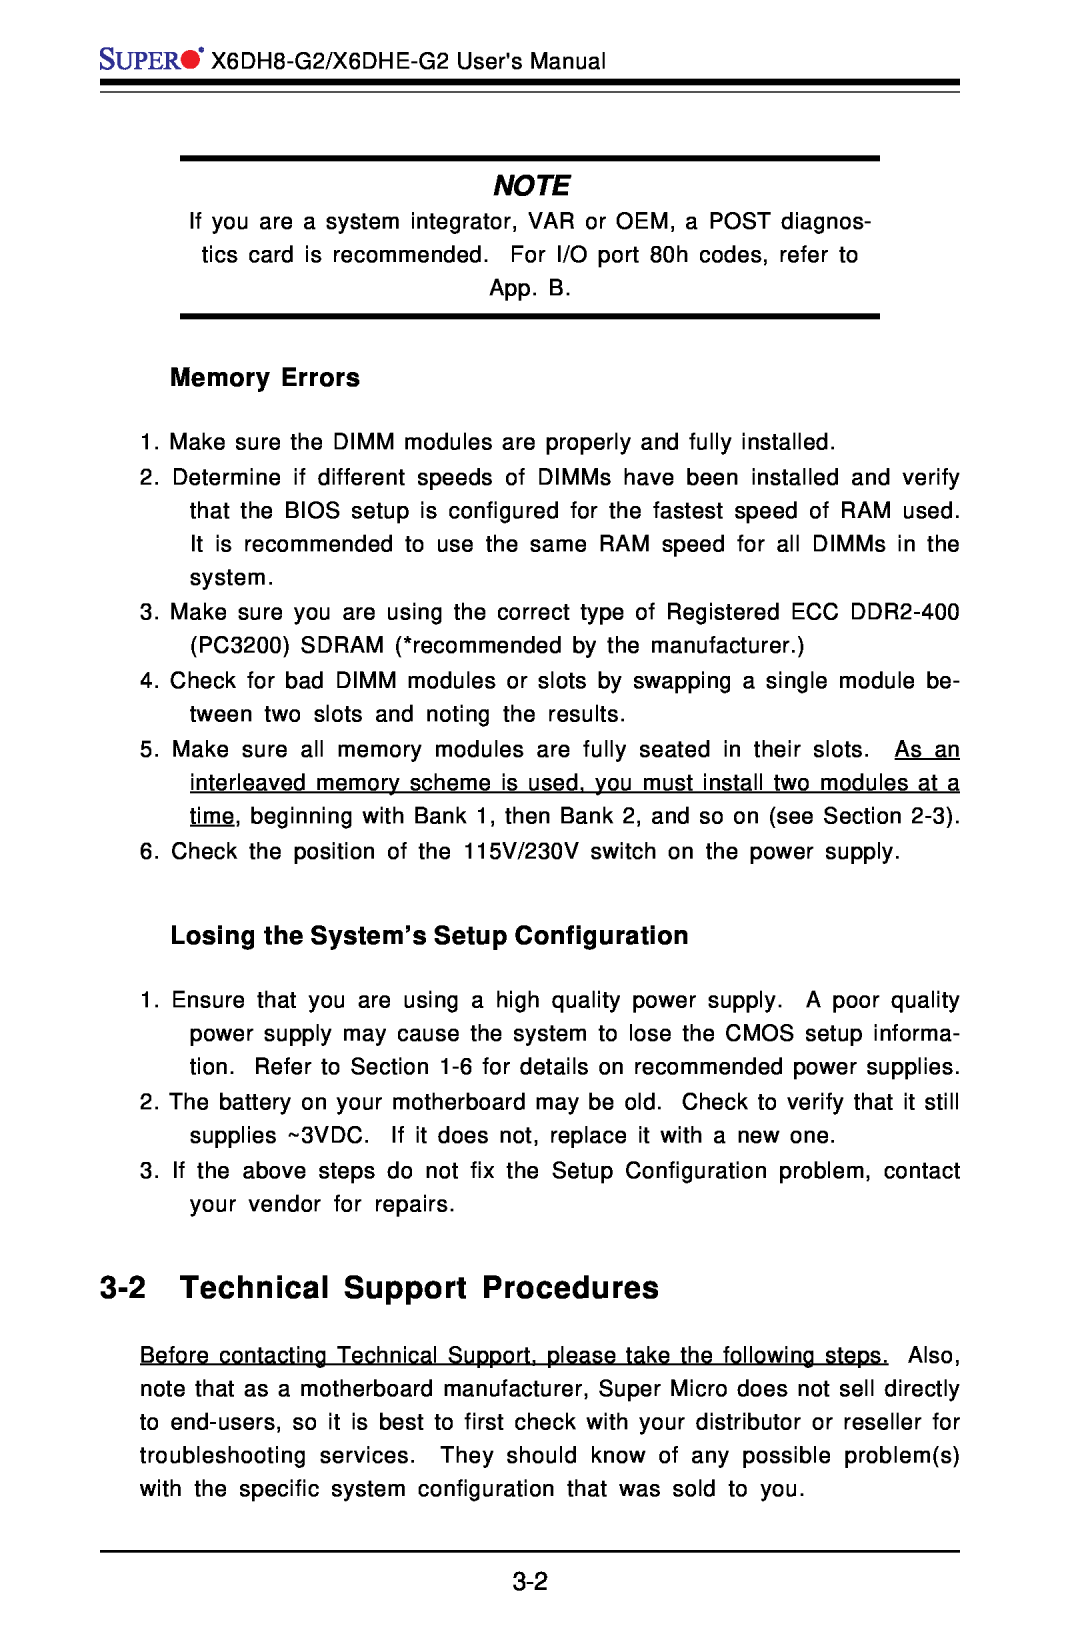 SUPER MICRO Computer X6DH8-G2 manual Technical Support Procedures, Memory Errors, Losing the System’s Setup Configuration 